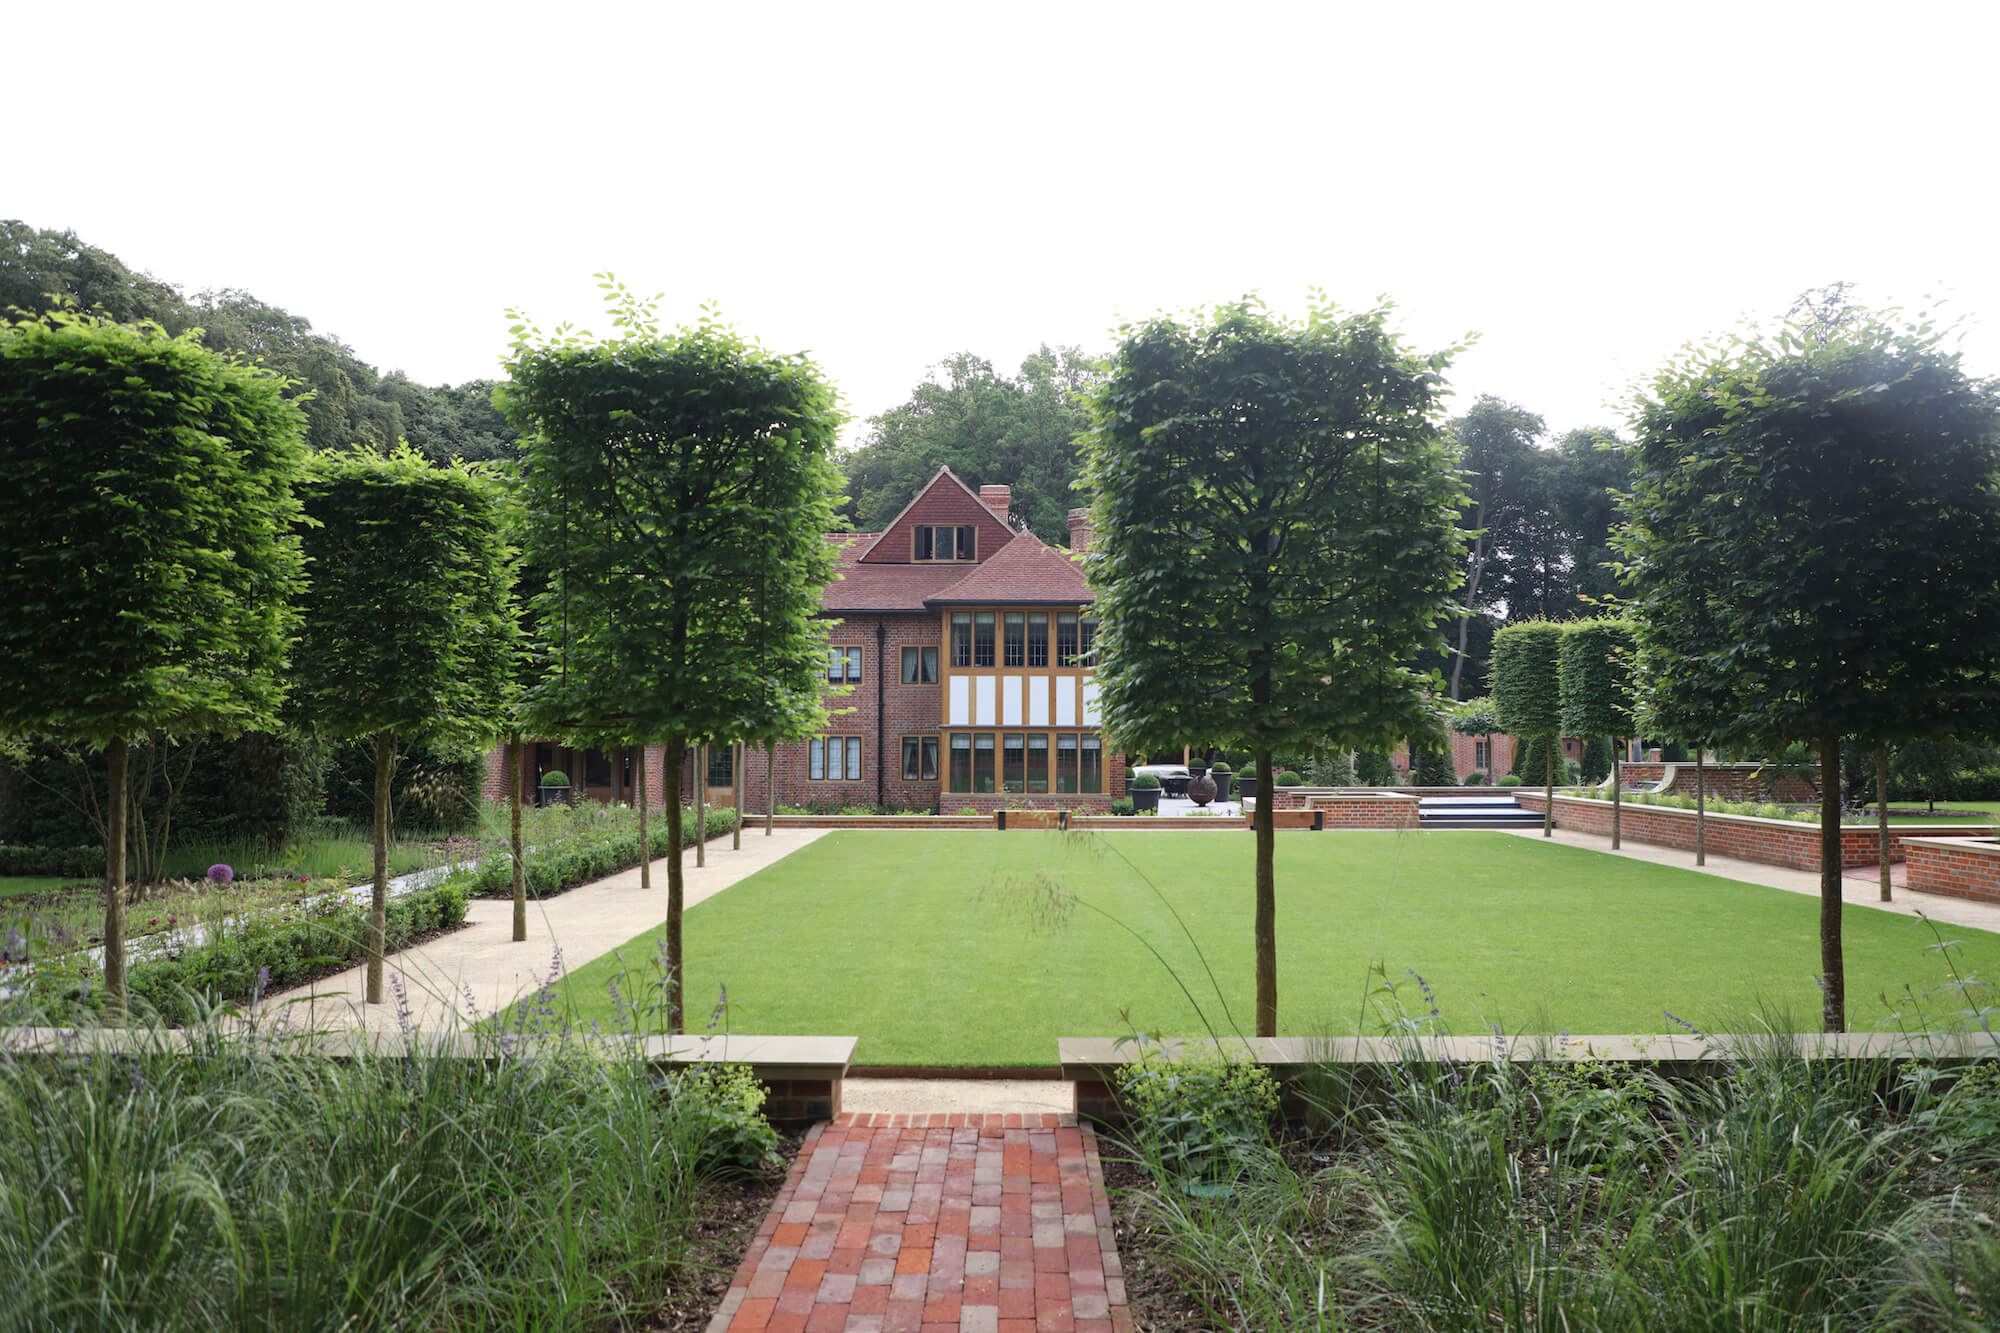 Harpsden Wood House in Henley-on-Thames with green grounds and gardens designed by Hendy Curzon Gardens